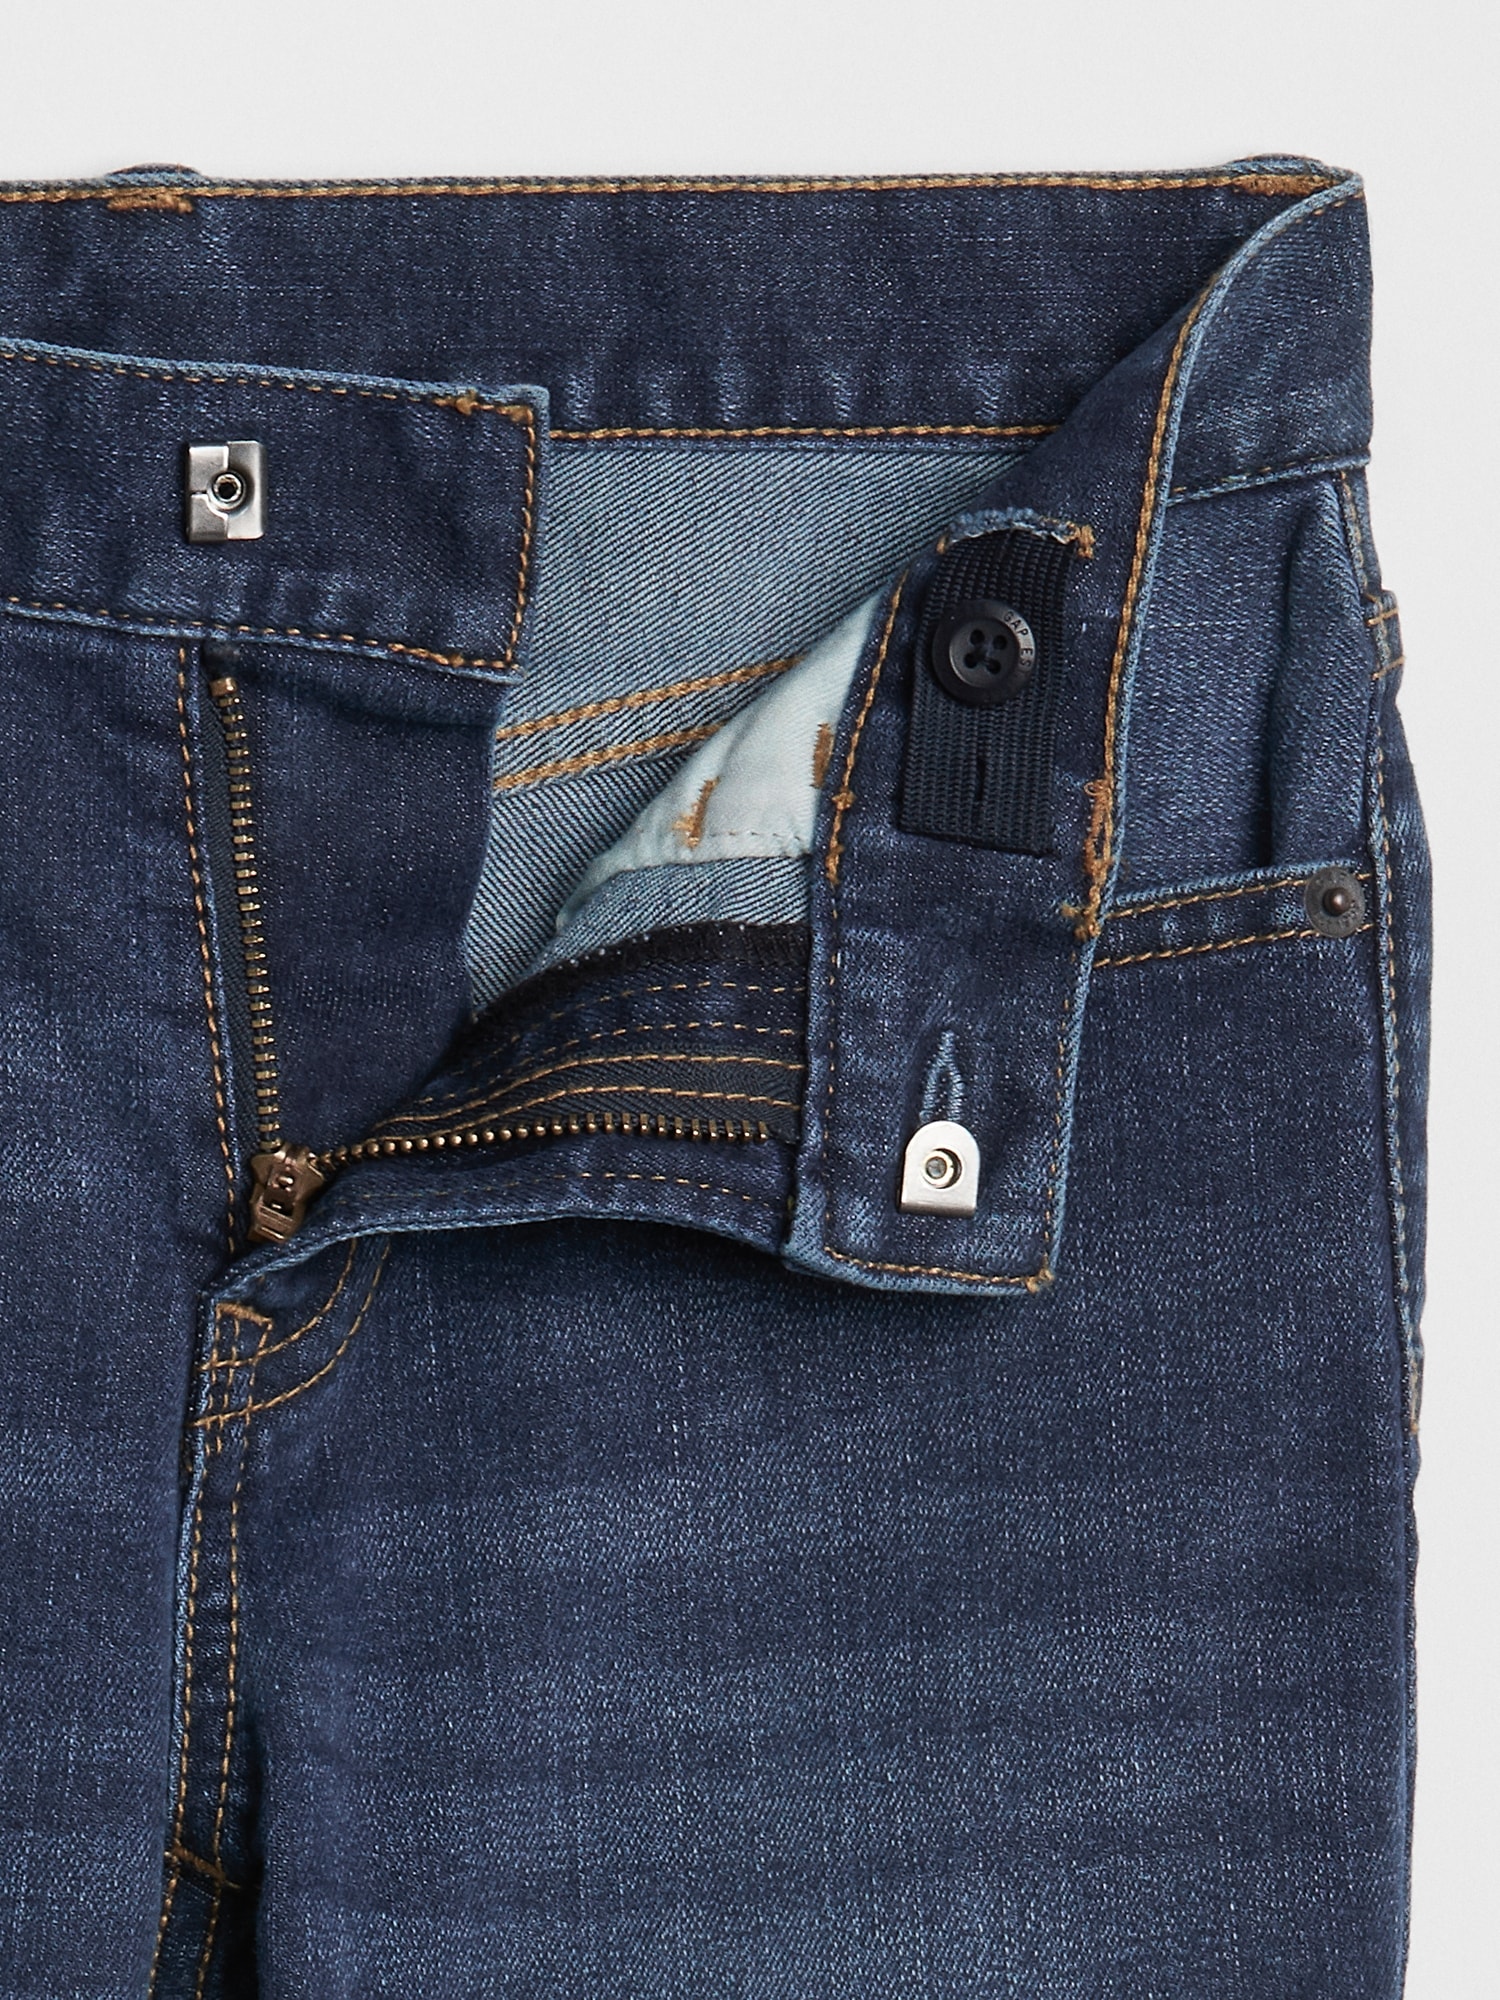 Kids Straight Jeans with Washwell | Gap Factory